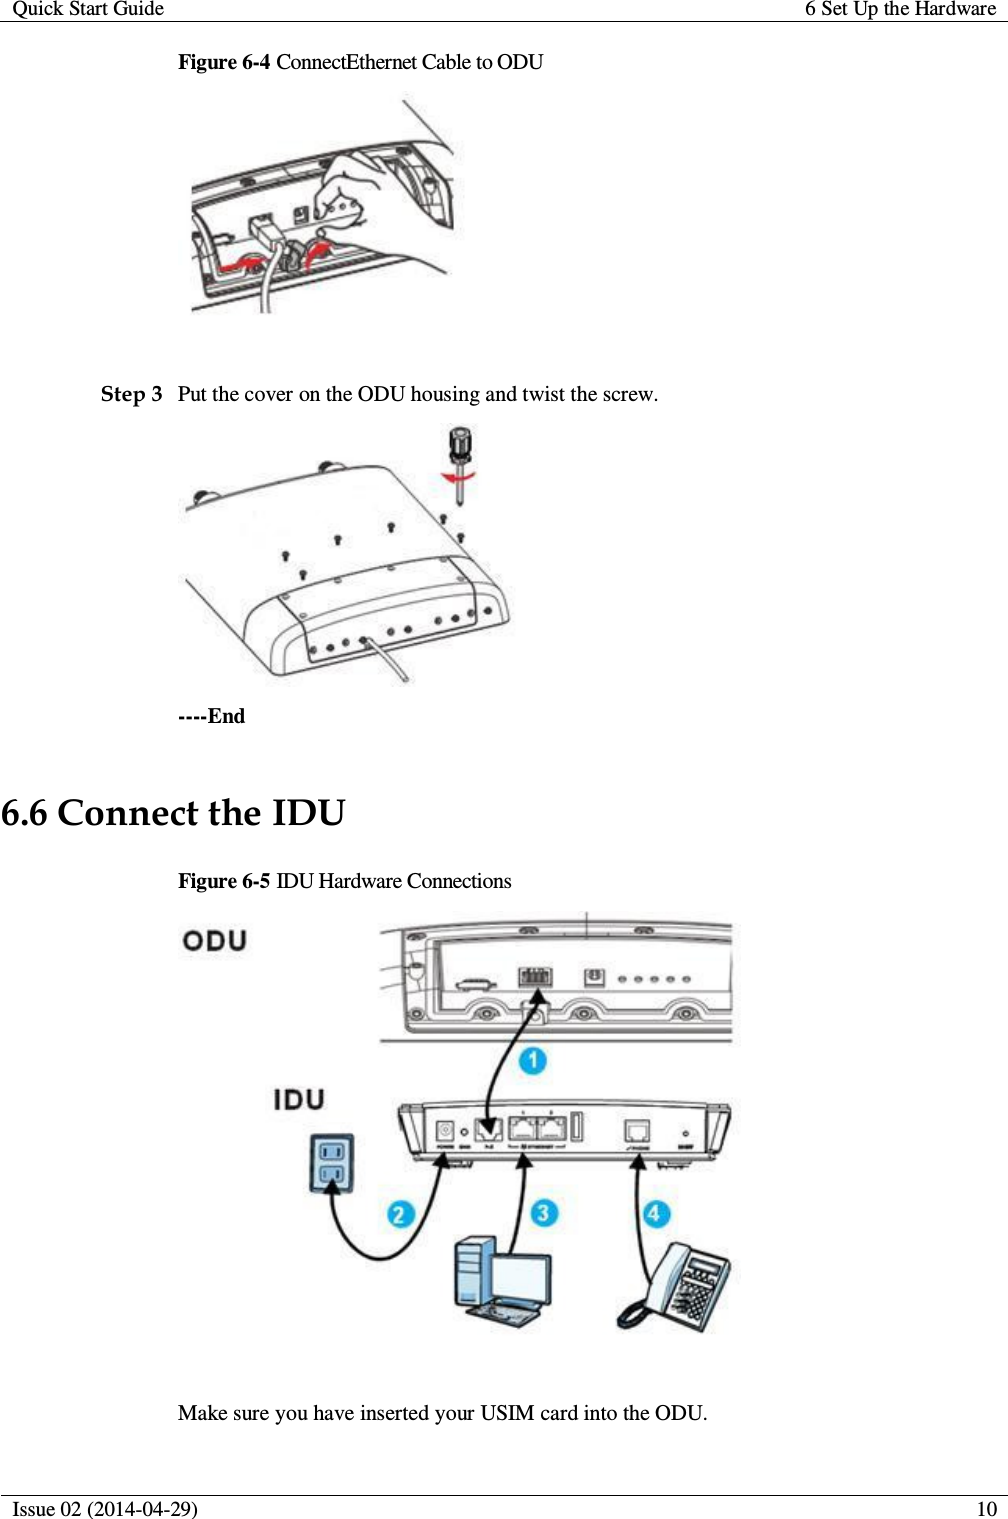 Quick Start Guide 6 Set Up the Hardware  Issue 02 (2014-04-29)  10  Figure 6-4 ConnectEthernet Cable to ODU   Step 3 Put the cover on the ODU housing and twist the screw.  ----End 6.6 Connect the IDU Figure 6-5 IDU Hardware Connections   Make sure you have inserted your USIM card into the ODU. 